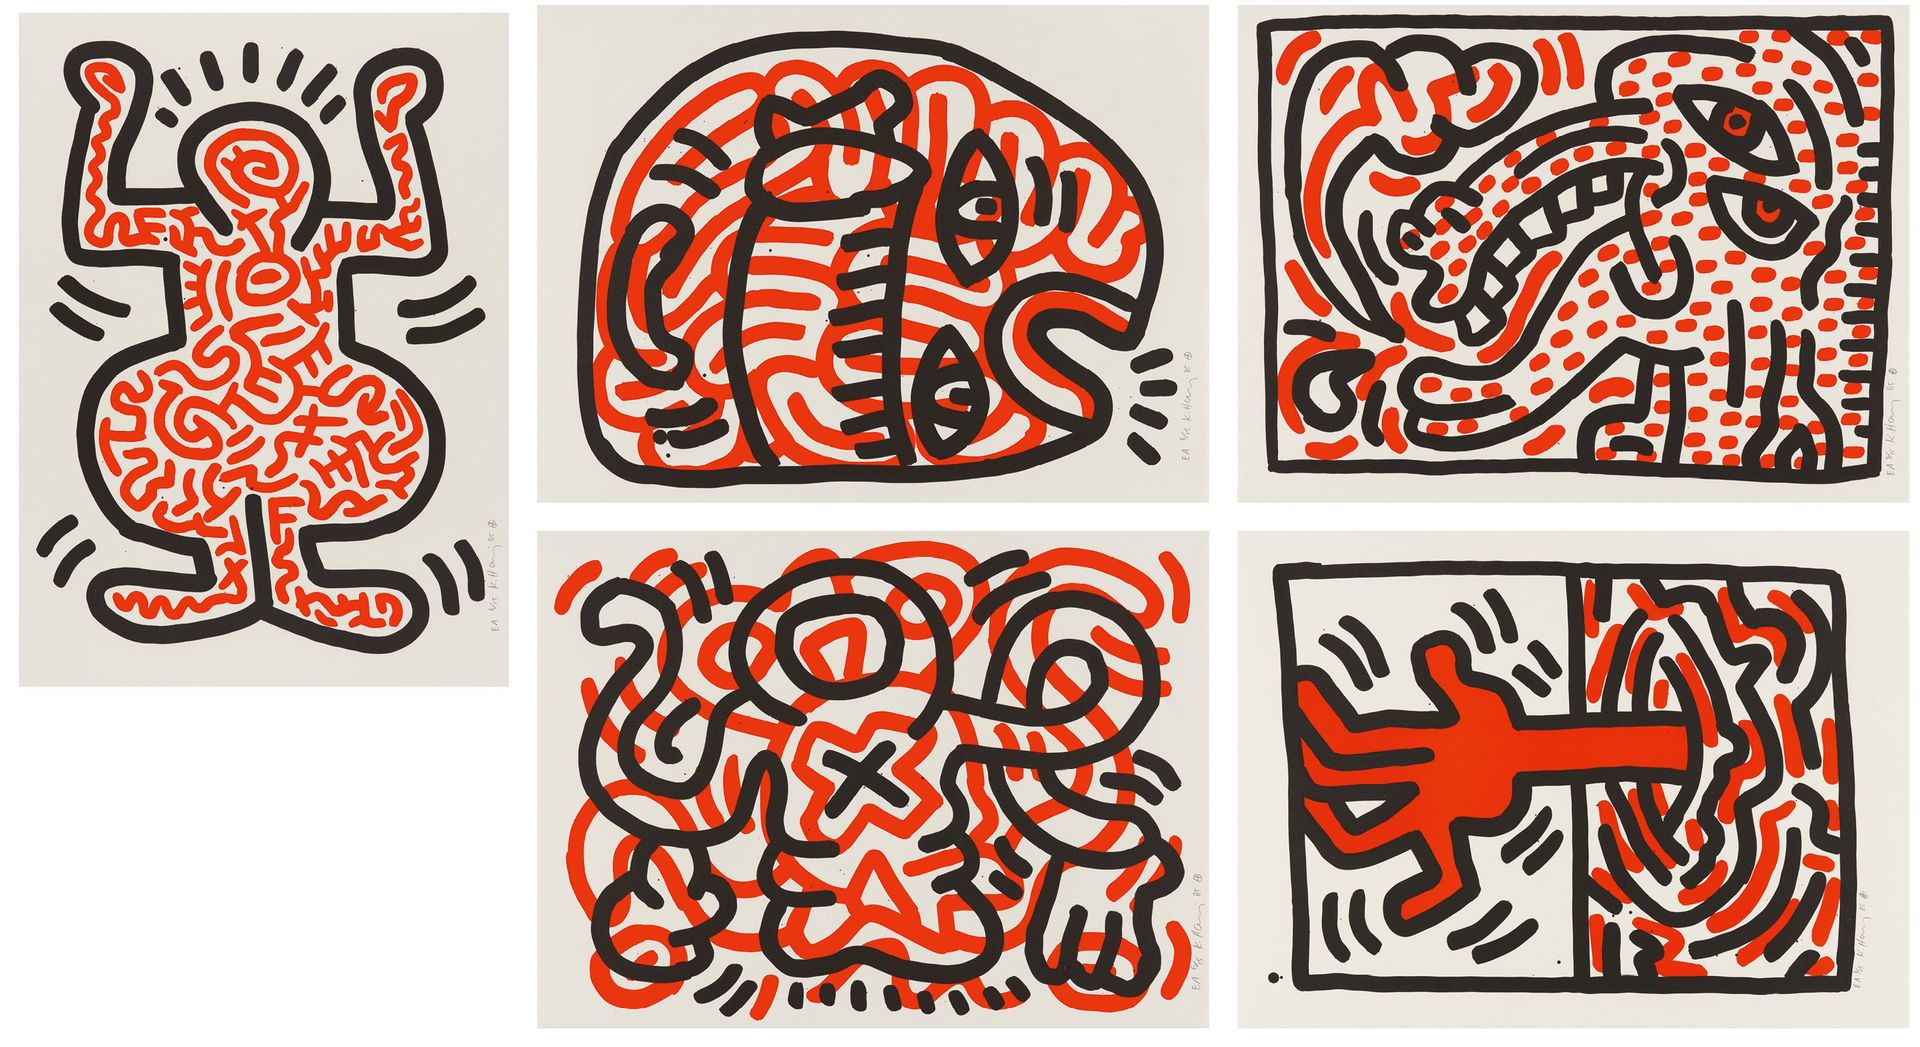 Keith Haring Keith Haring

Ludo
1985

5 color lithographs on cardboard Each 66 x&hellip;